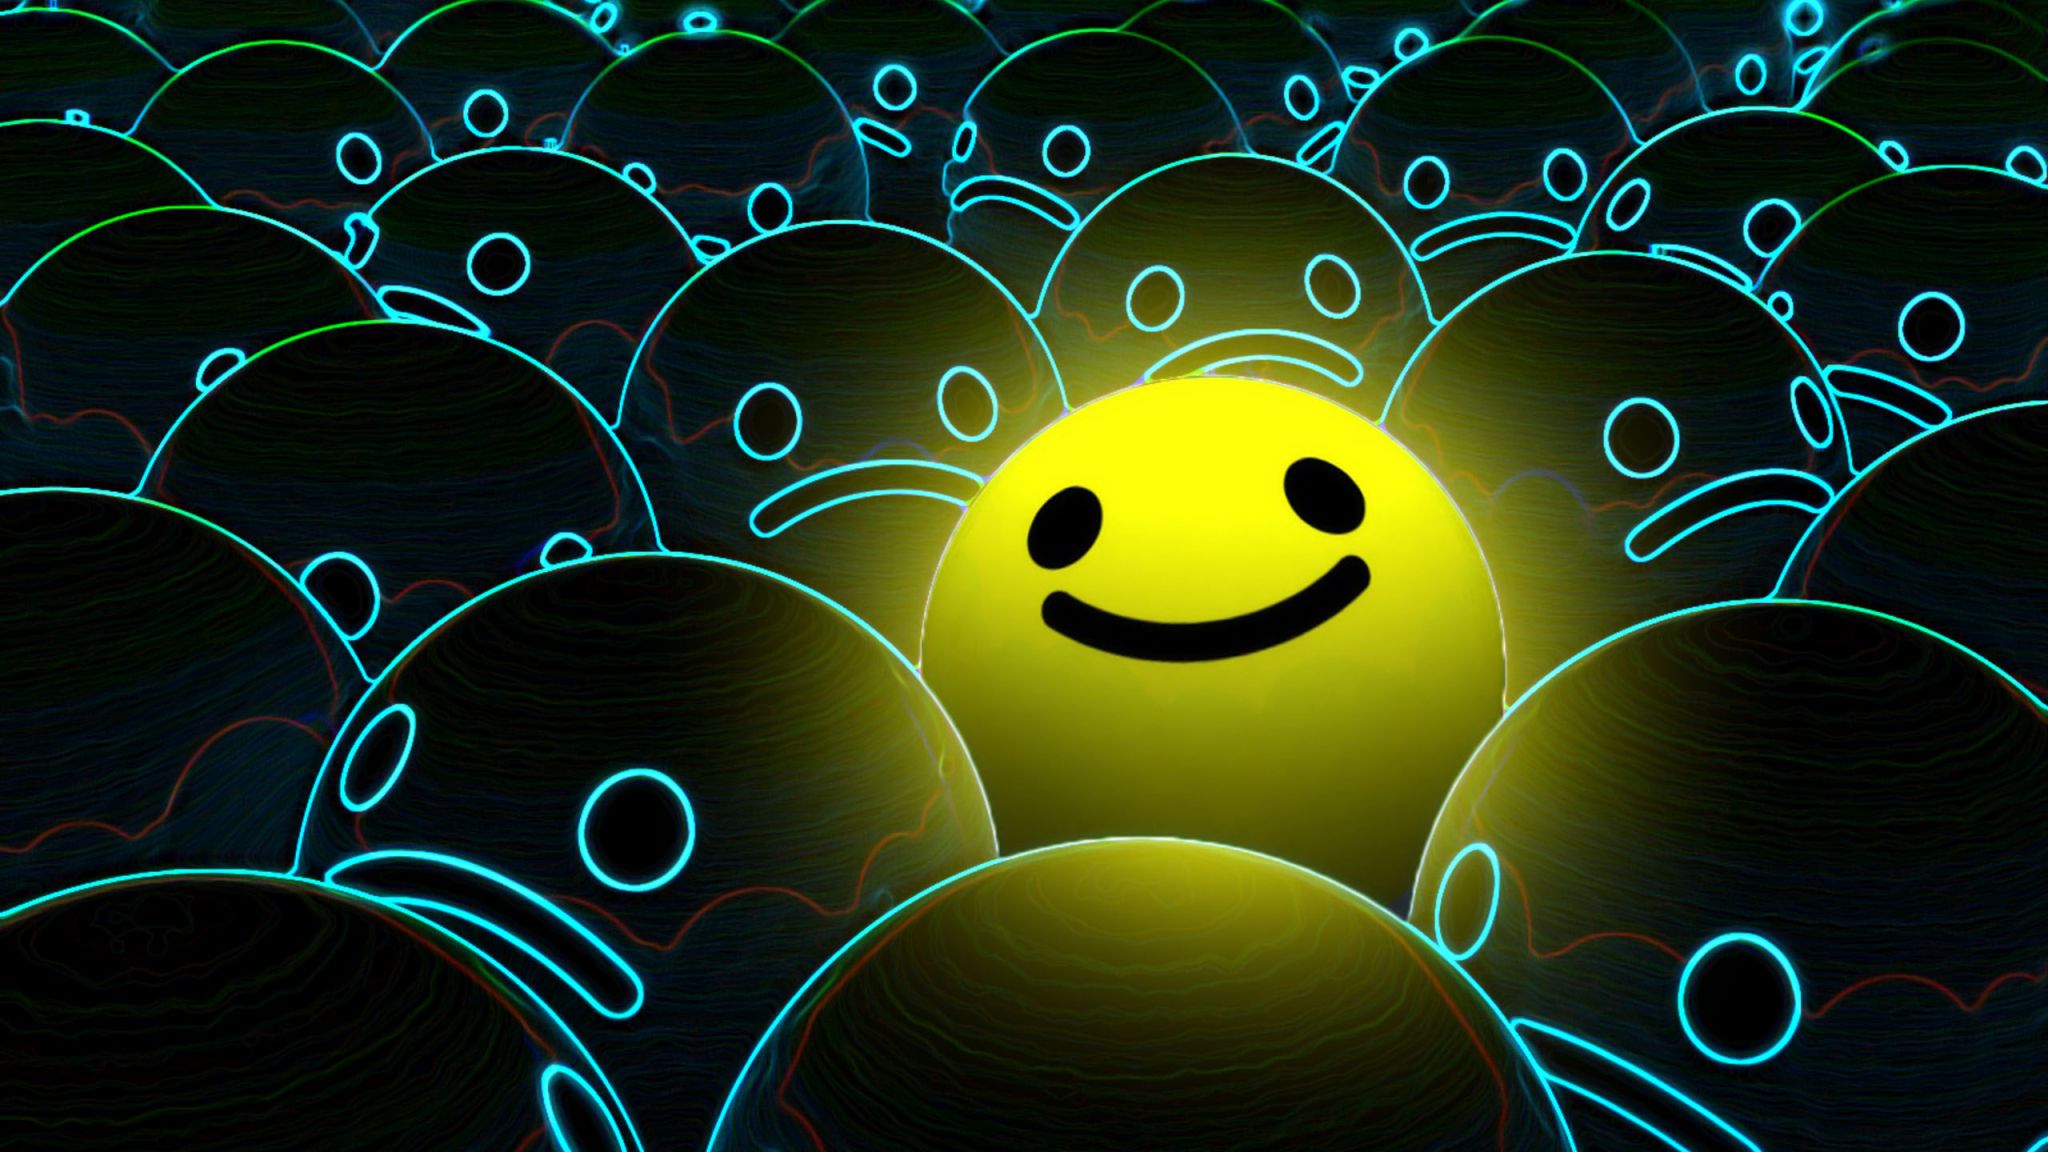 Smiley Face wallpaper in 2048x1152 resolution